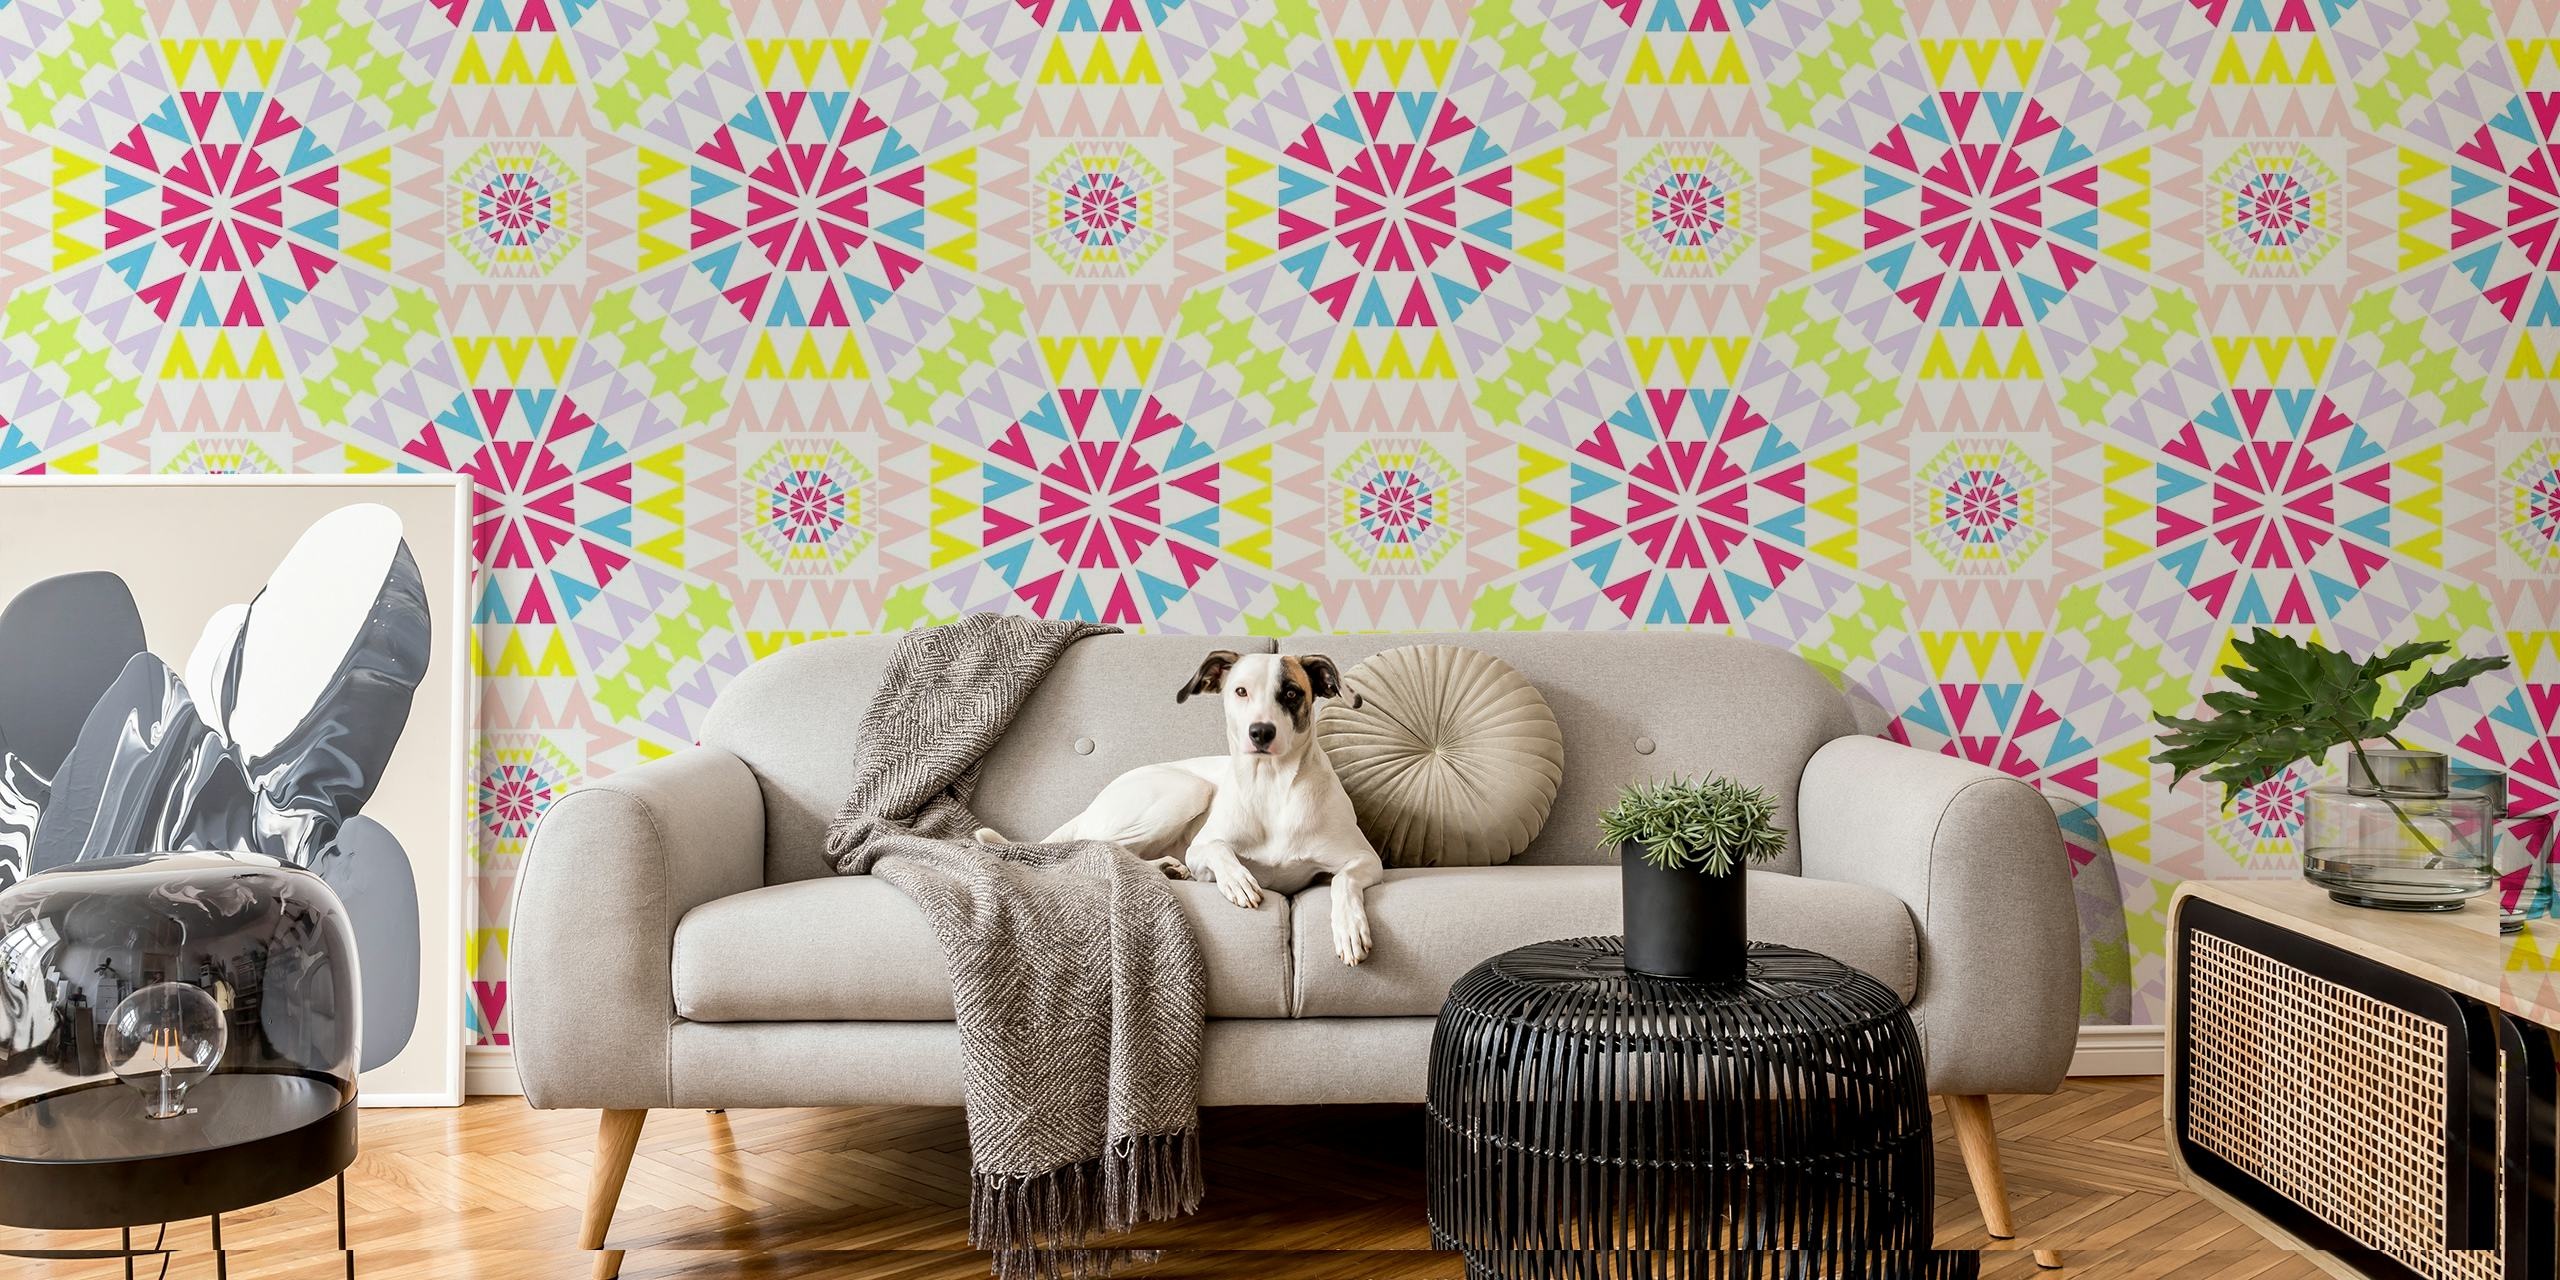 Colorful mosaic patterned 'Letter V' wall mural design from Happywall with pink, blue, and yellow motifs on cream background